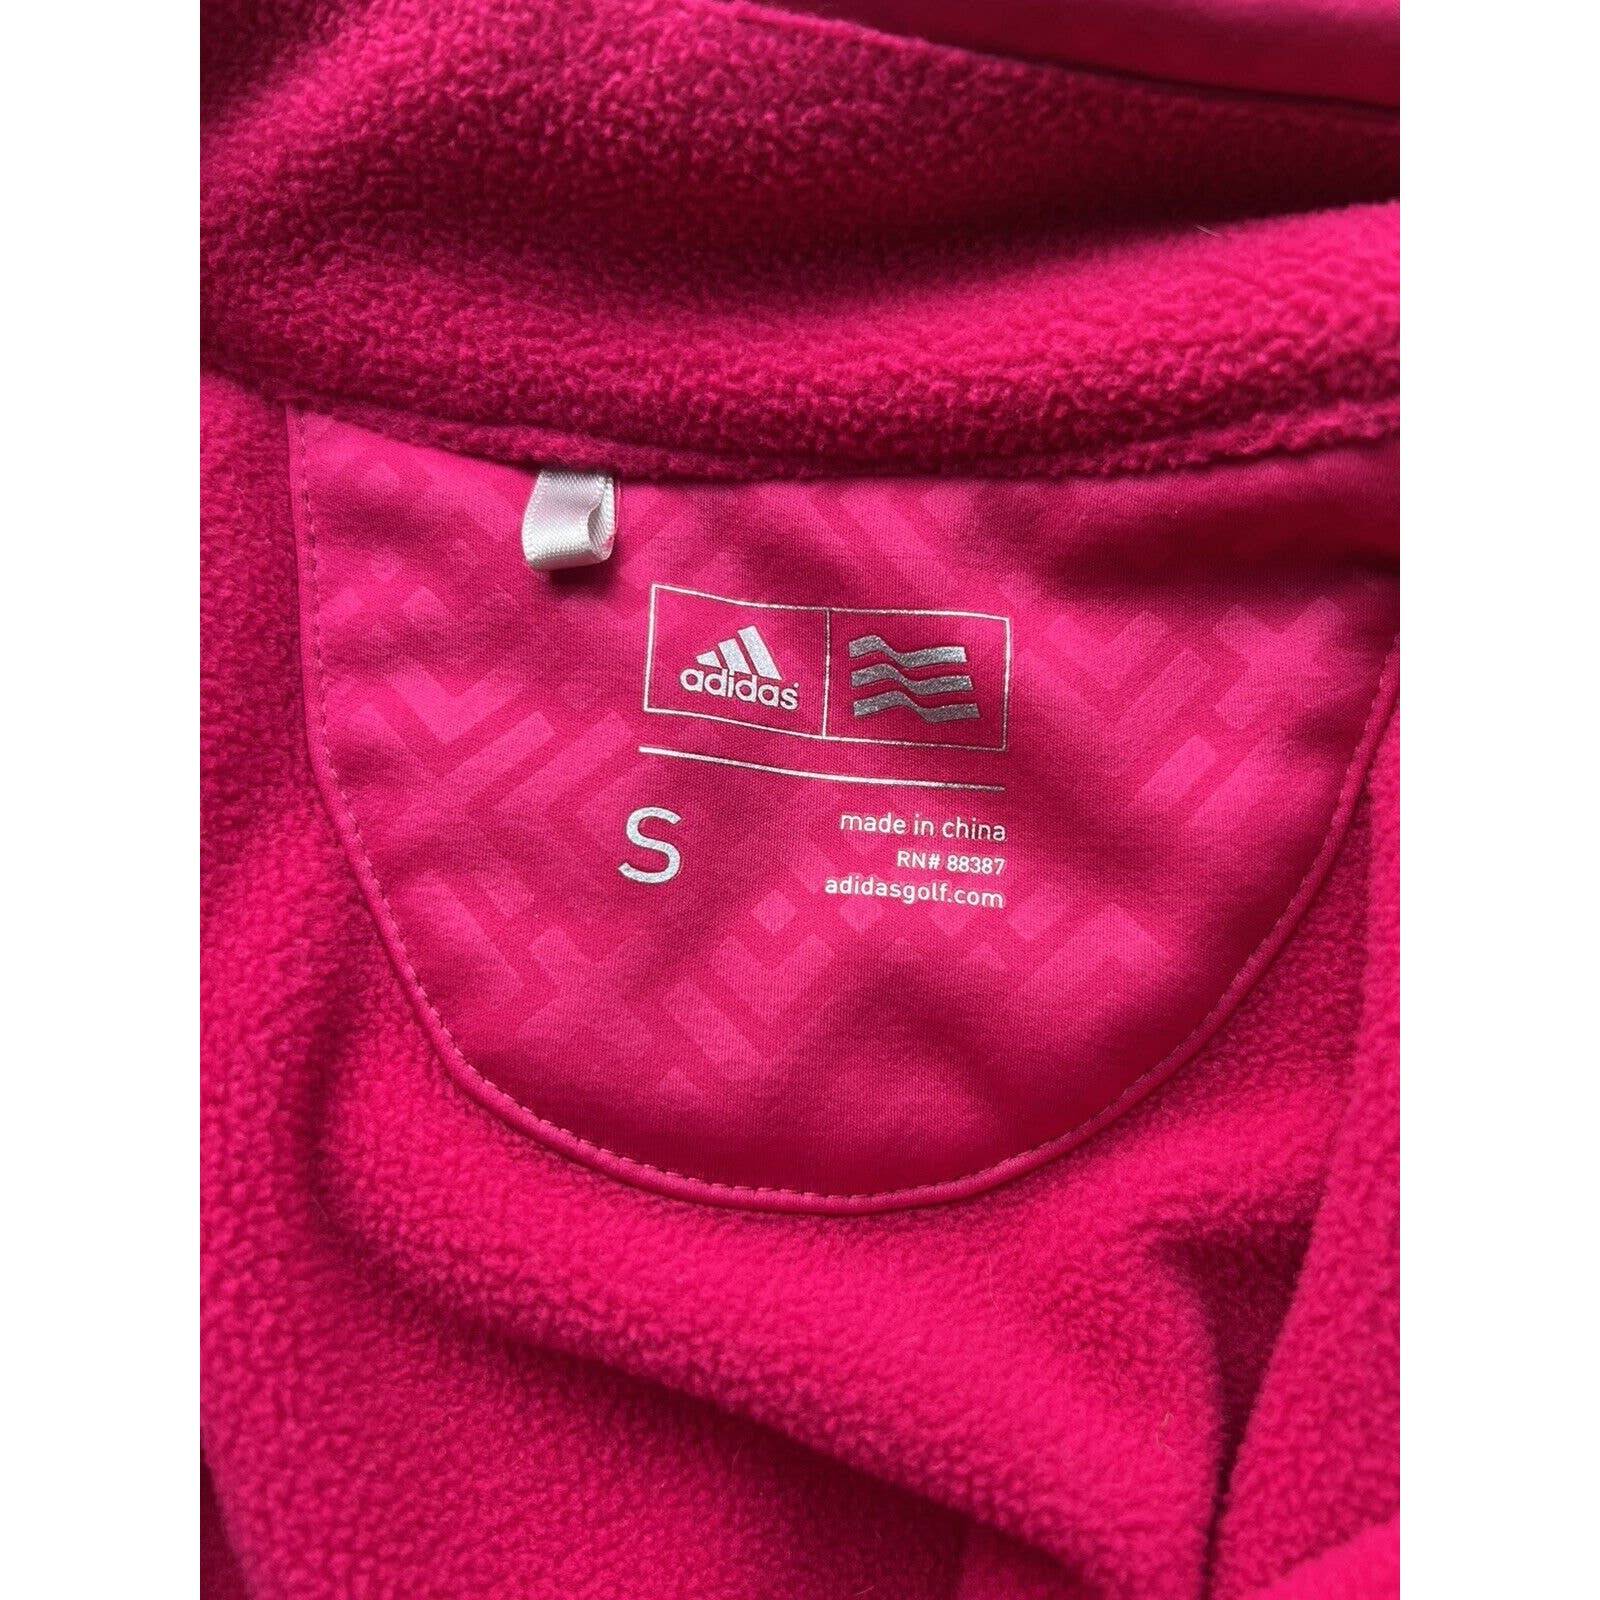 Adidas Women's Small Pink Long Sleeve 1/4 Zip Performance Pullover EXCELLENT